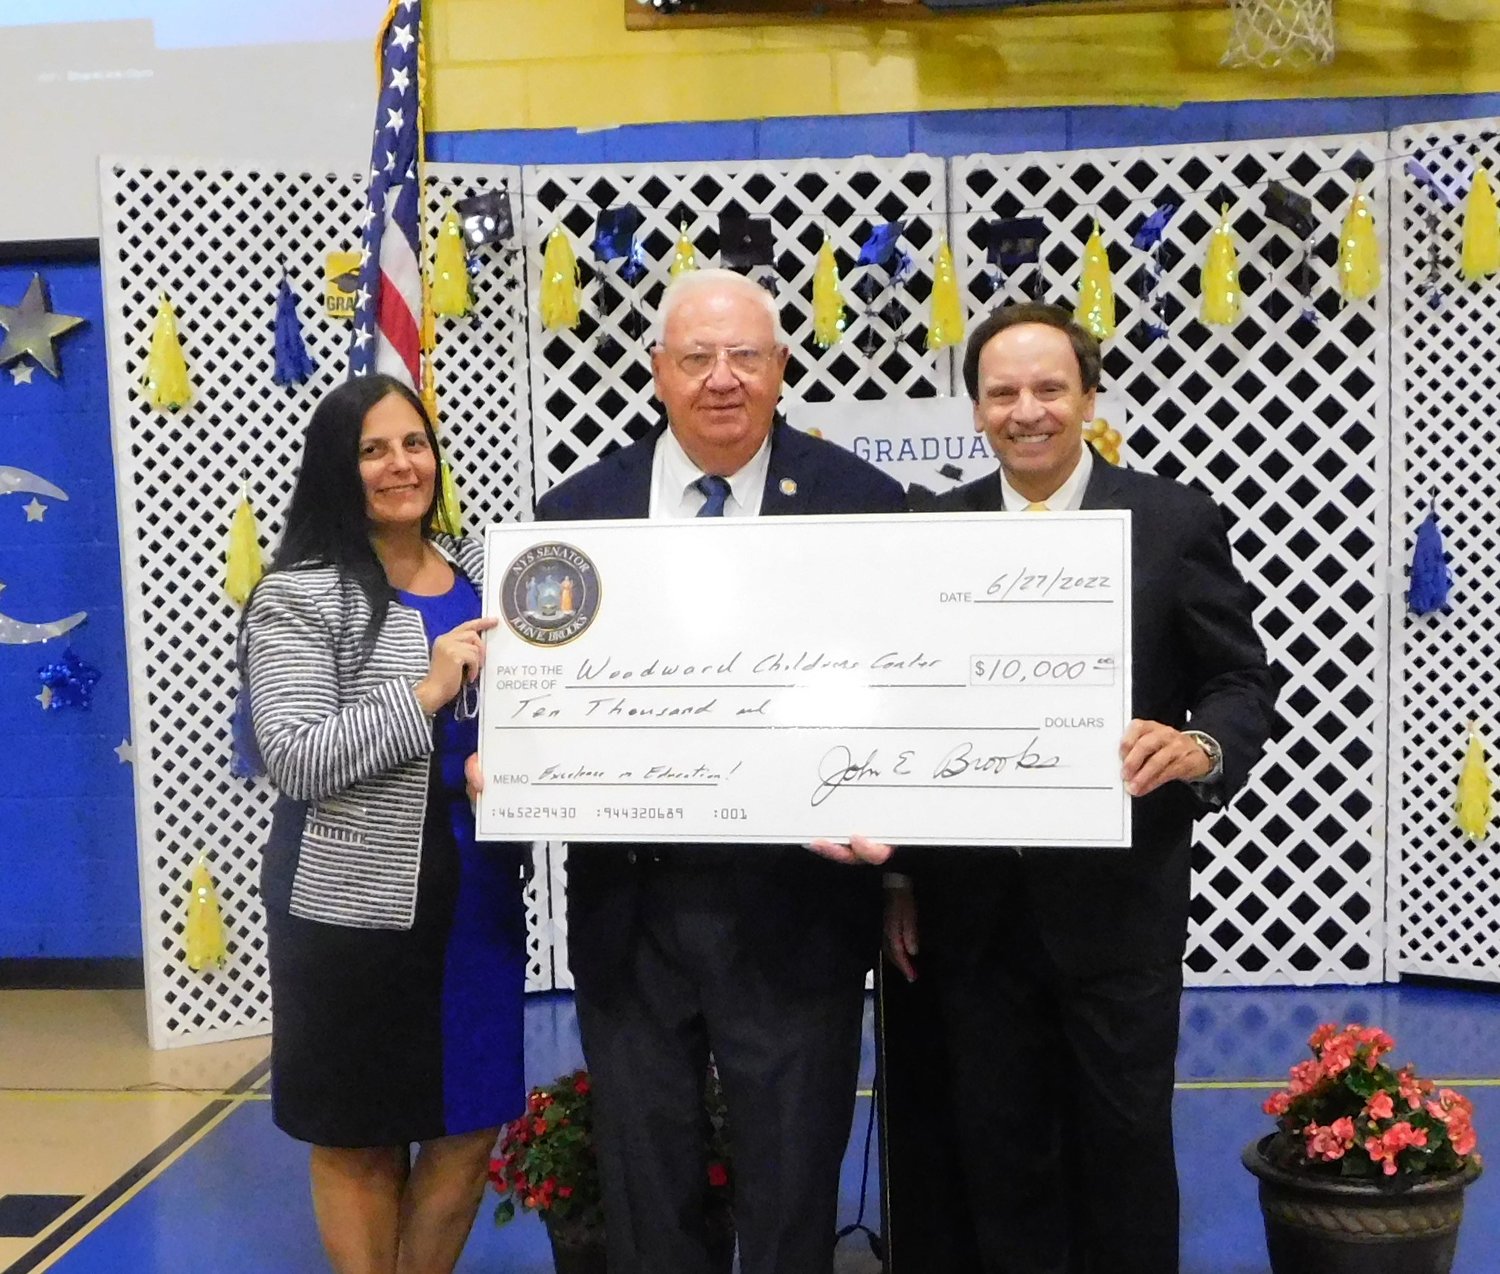 State Senator John Brooks, center, gave a donation of $10,000 to Woodward Children’s Center, which was received by Principal Danielle Colucci and Executive Director Greg Ingino.